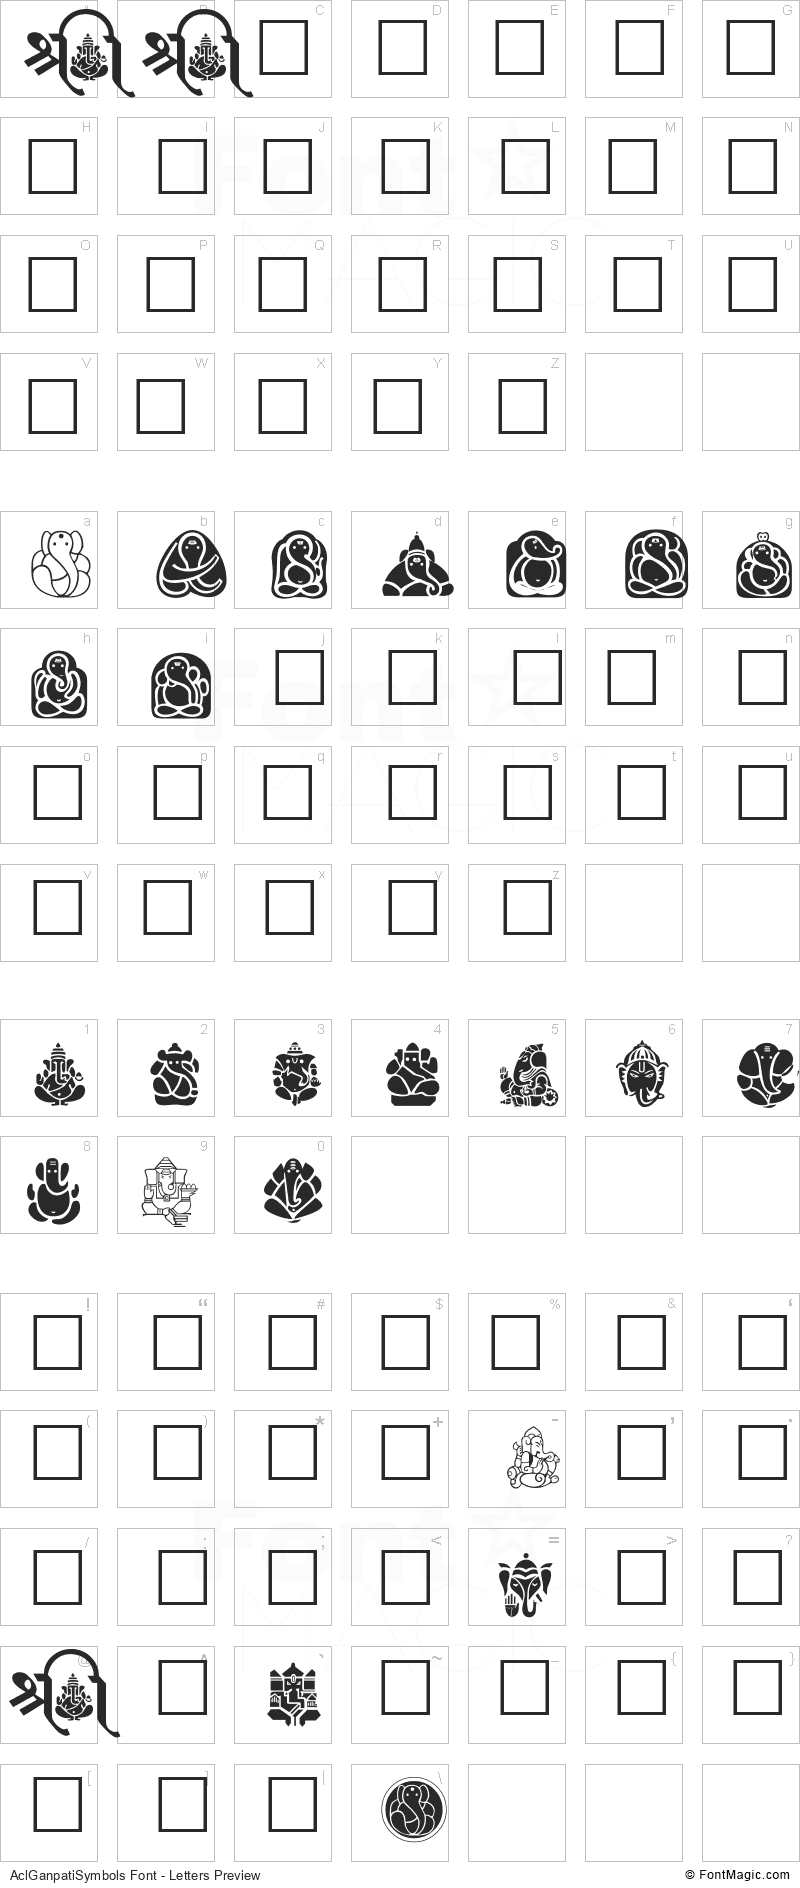 AclGanpatiSymbols Font - All Latters Preview Chart